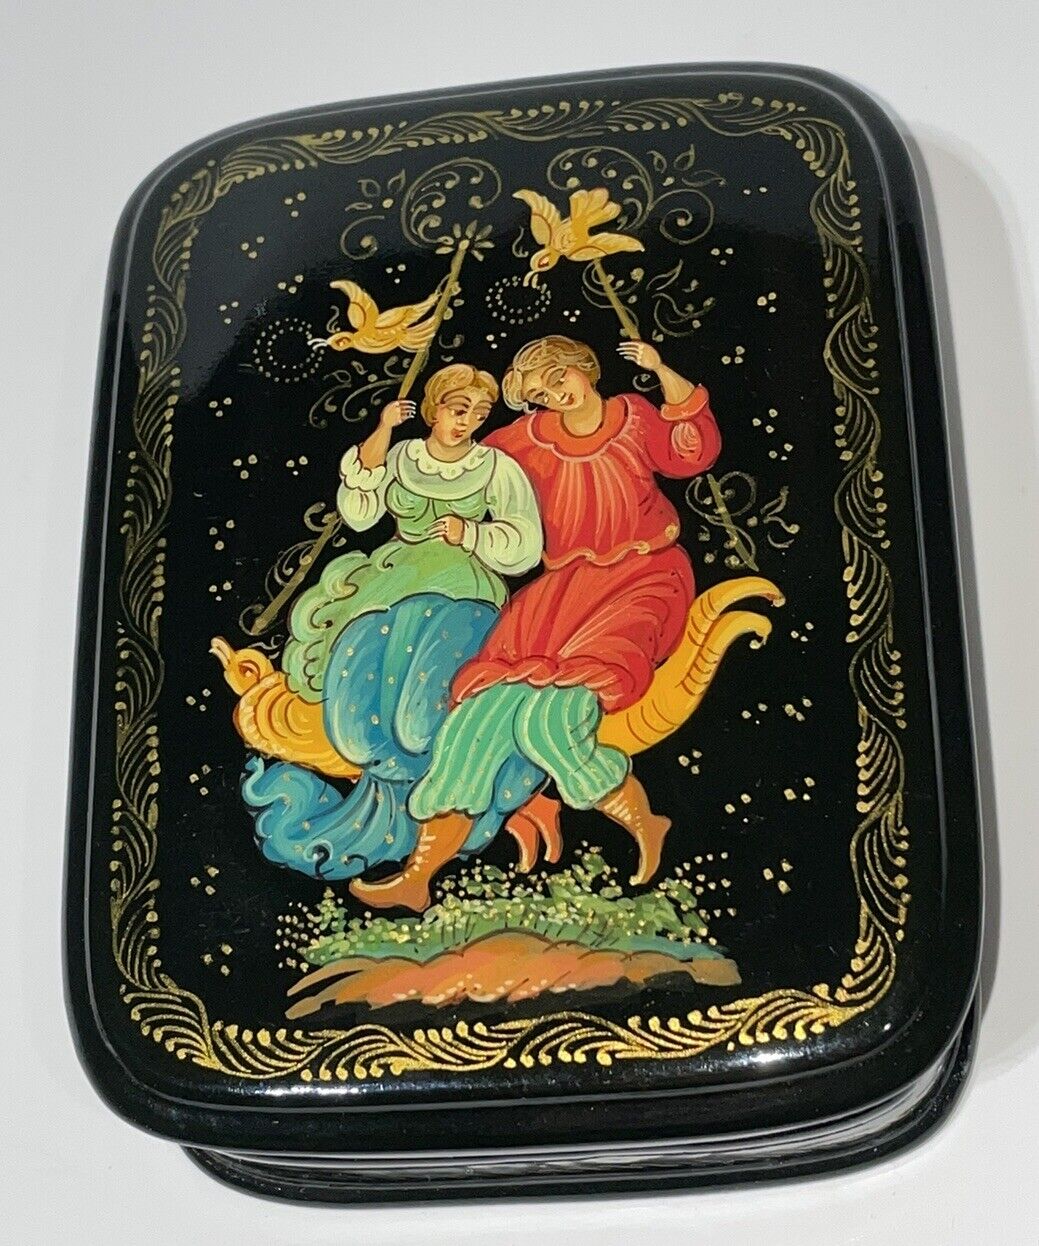 Vintage Signed Russian Lacquer Trinket Box Hand Painted Hinged Top Black And Red